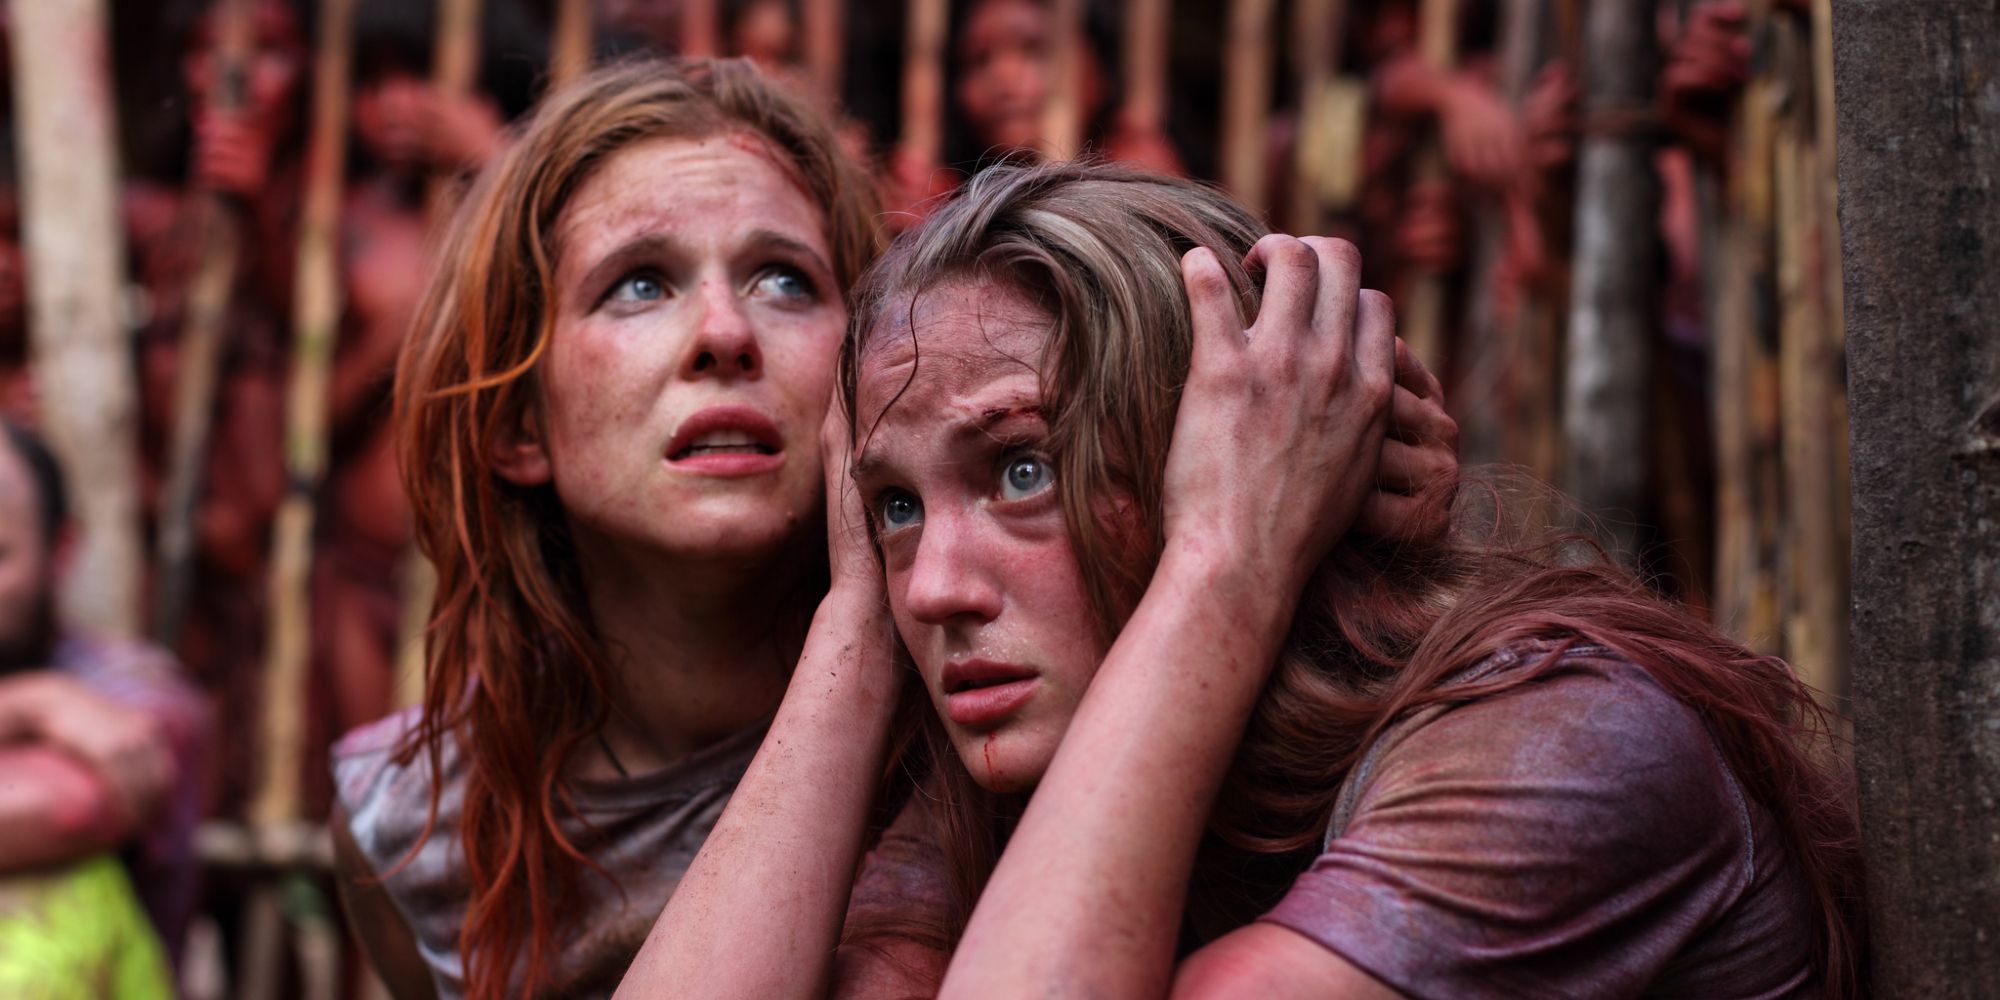 A still from the 2013 horror movie The Green Inferno.